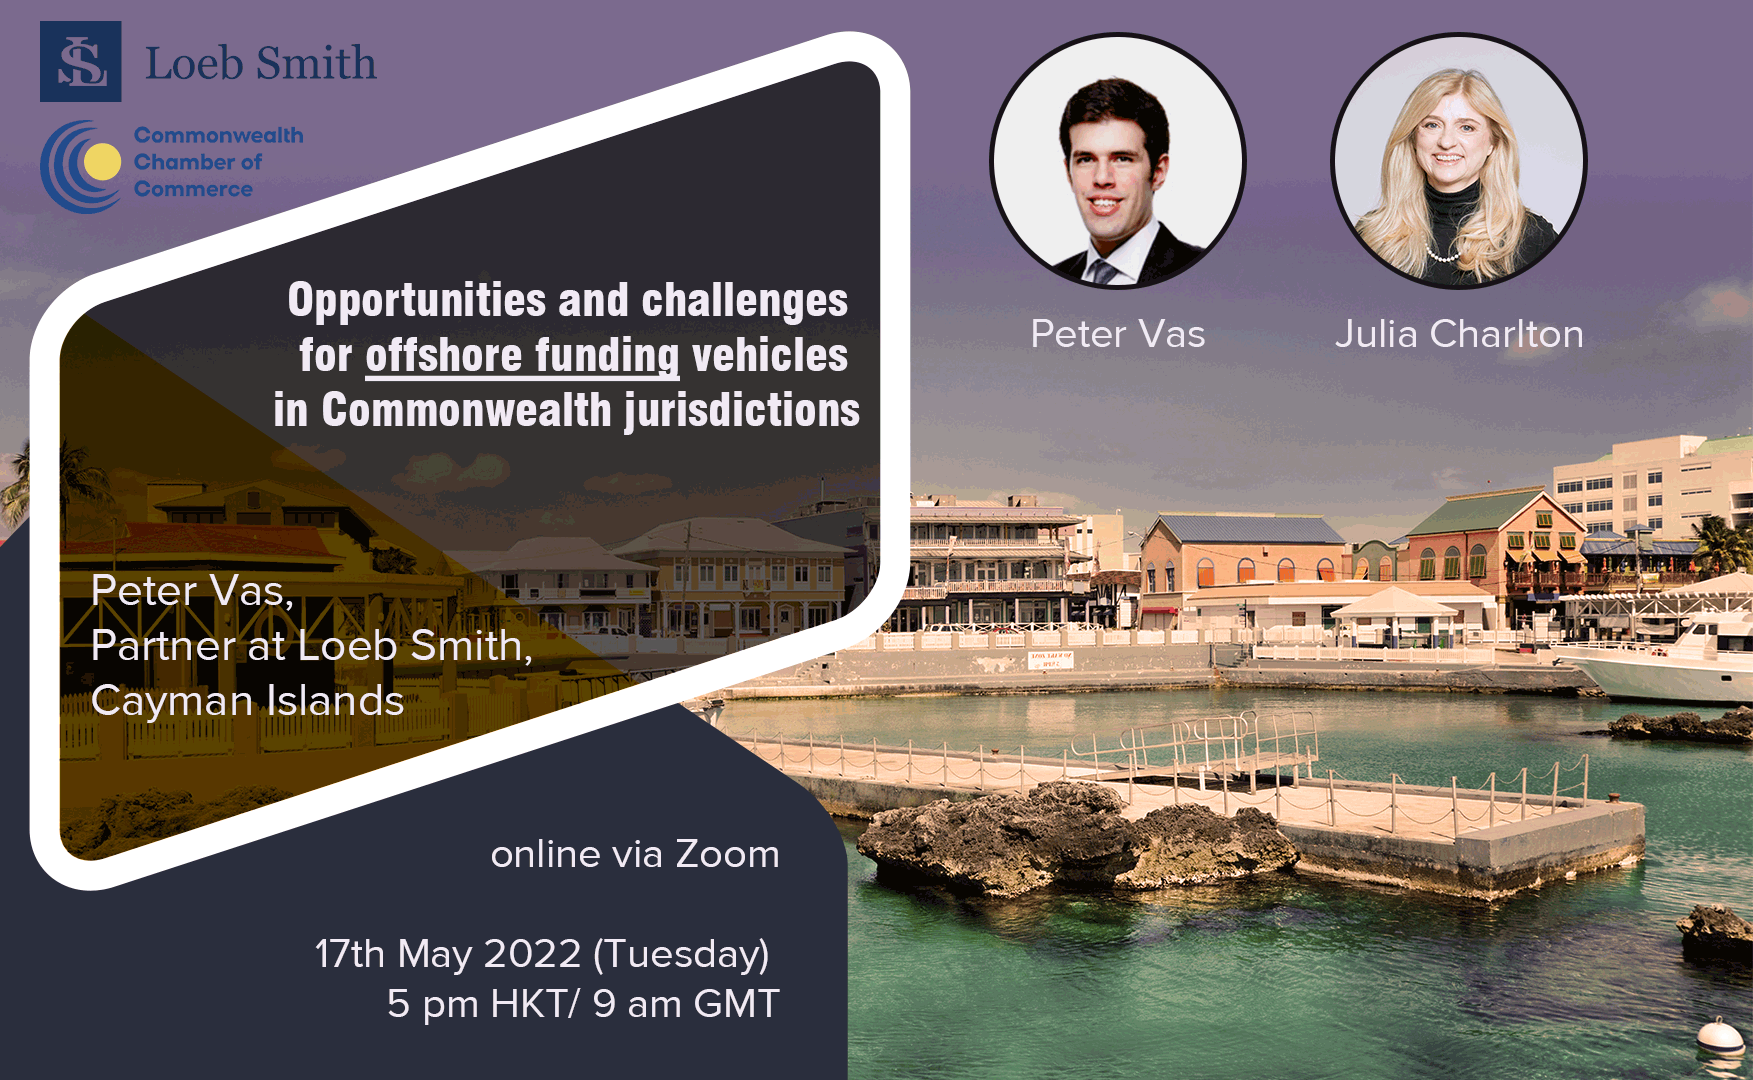 Opportunities and challenges for offshore funding vehicles in Commonwealth jurisdictions